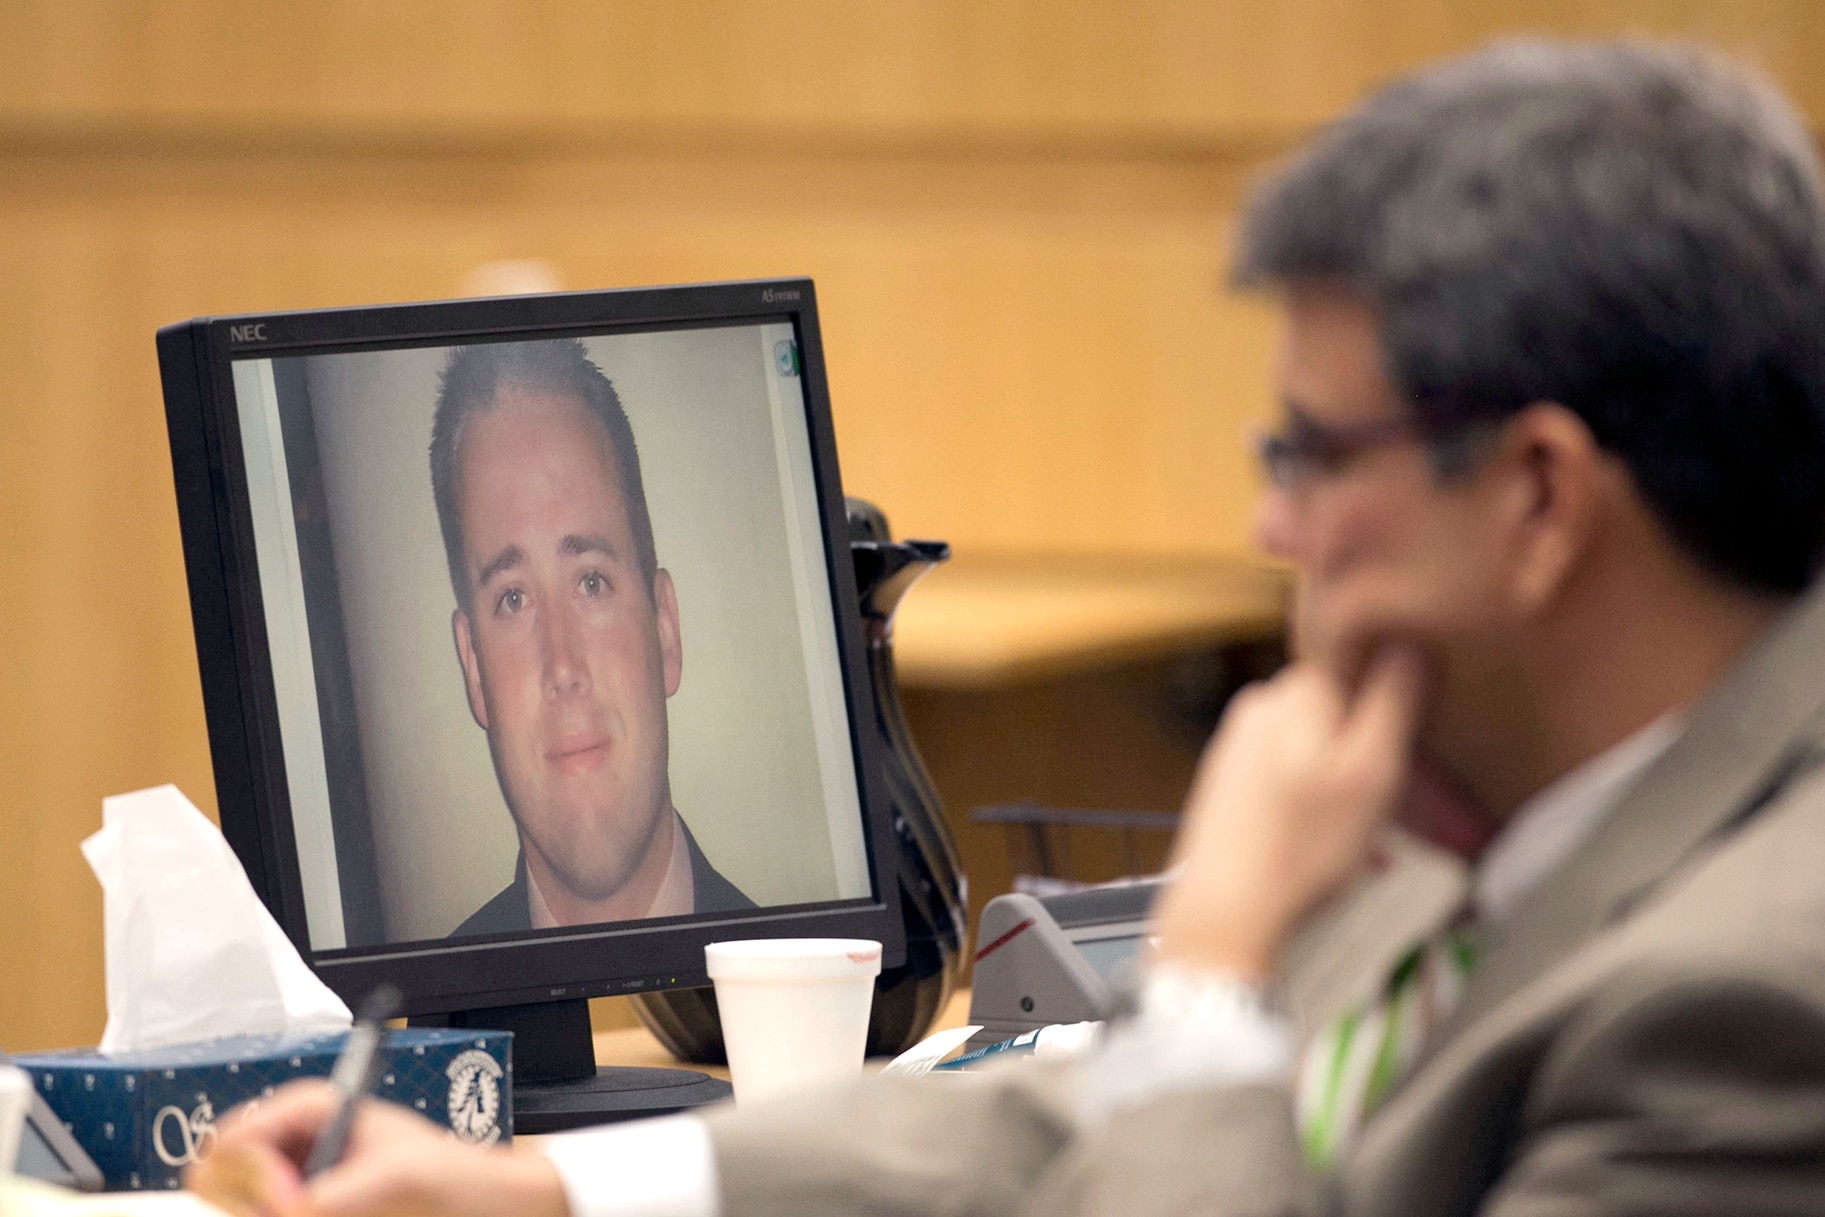 A photograph of Travis Alexander appears on a computer monitor